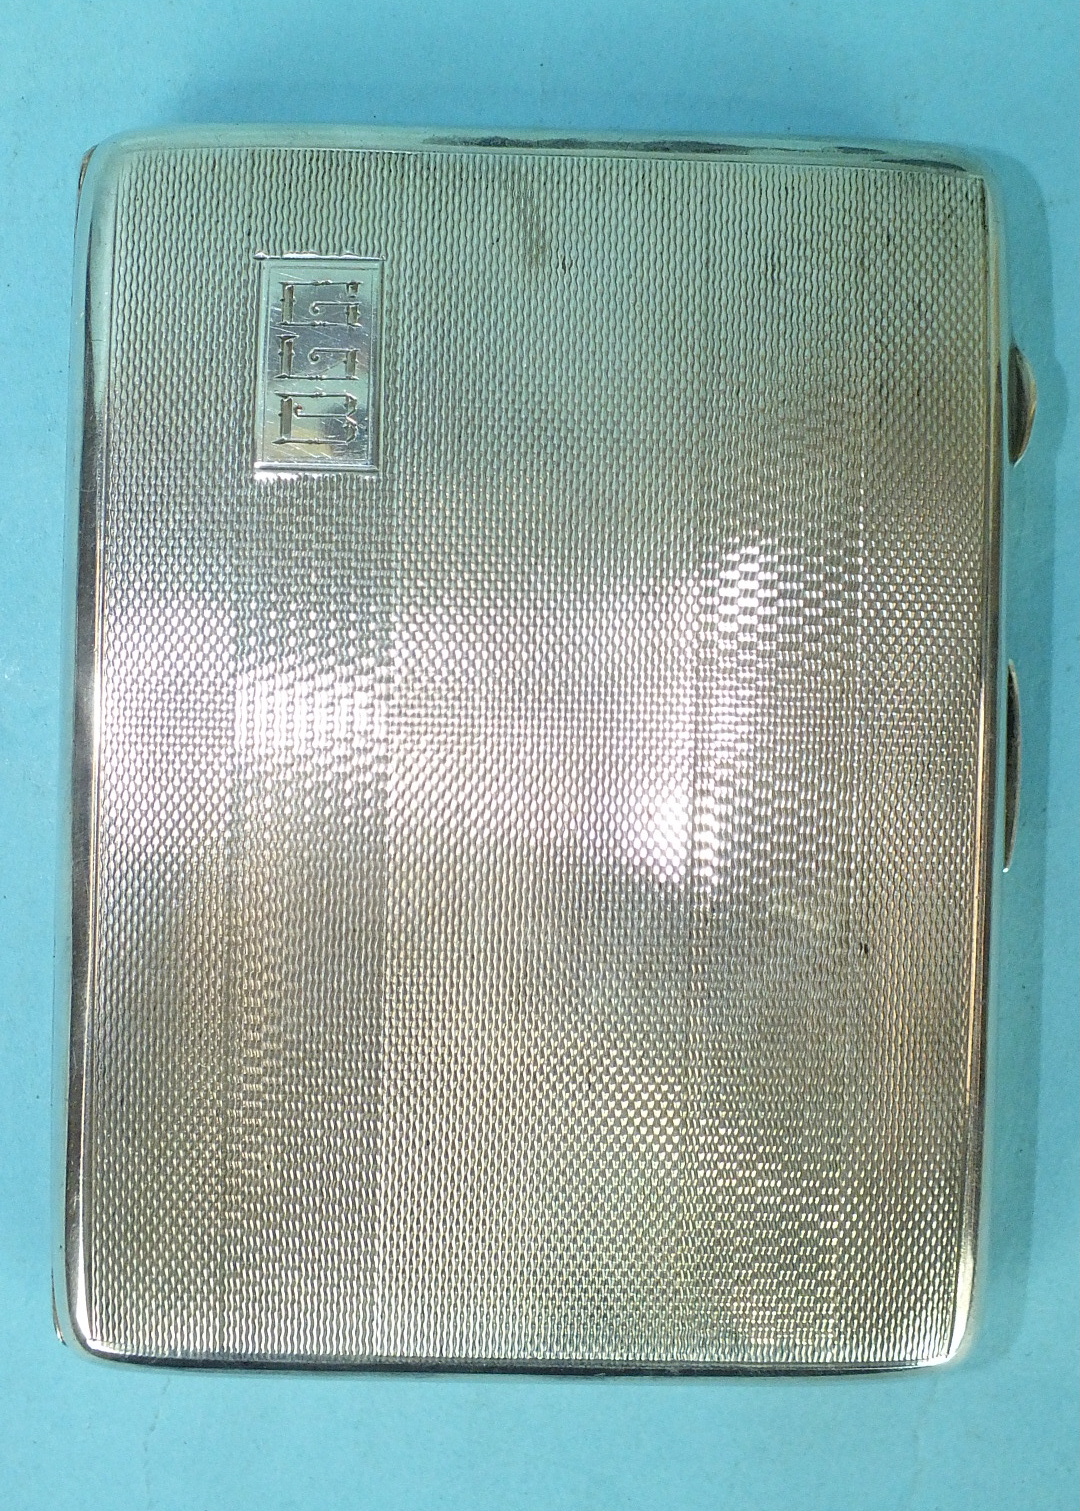 An engine-turned silver cigarette case, Birmingham 1946, 11 x 8.5cm, engraved initials outside,